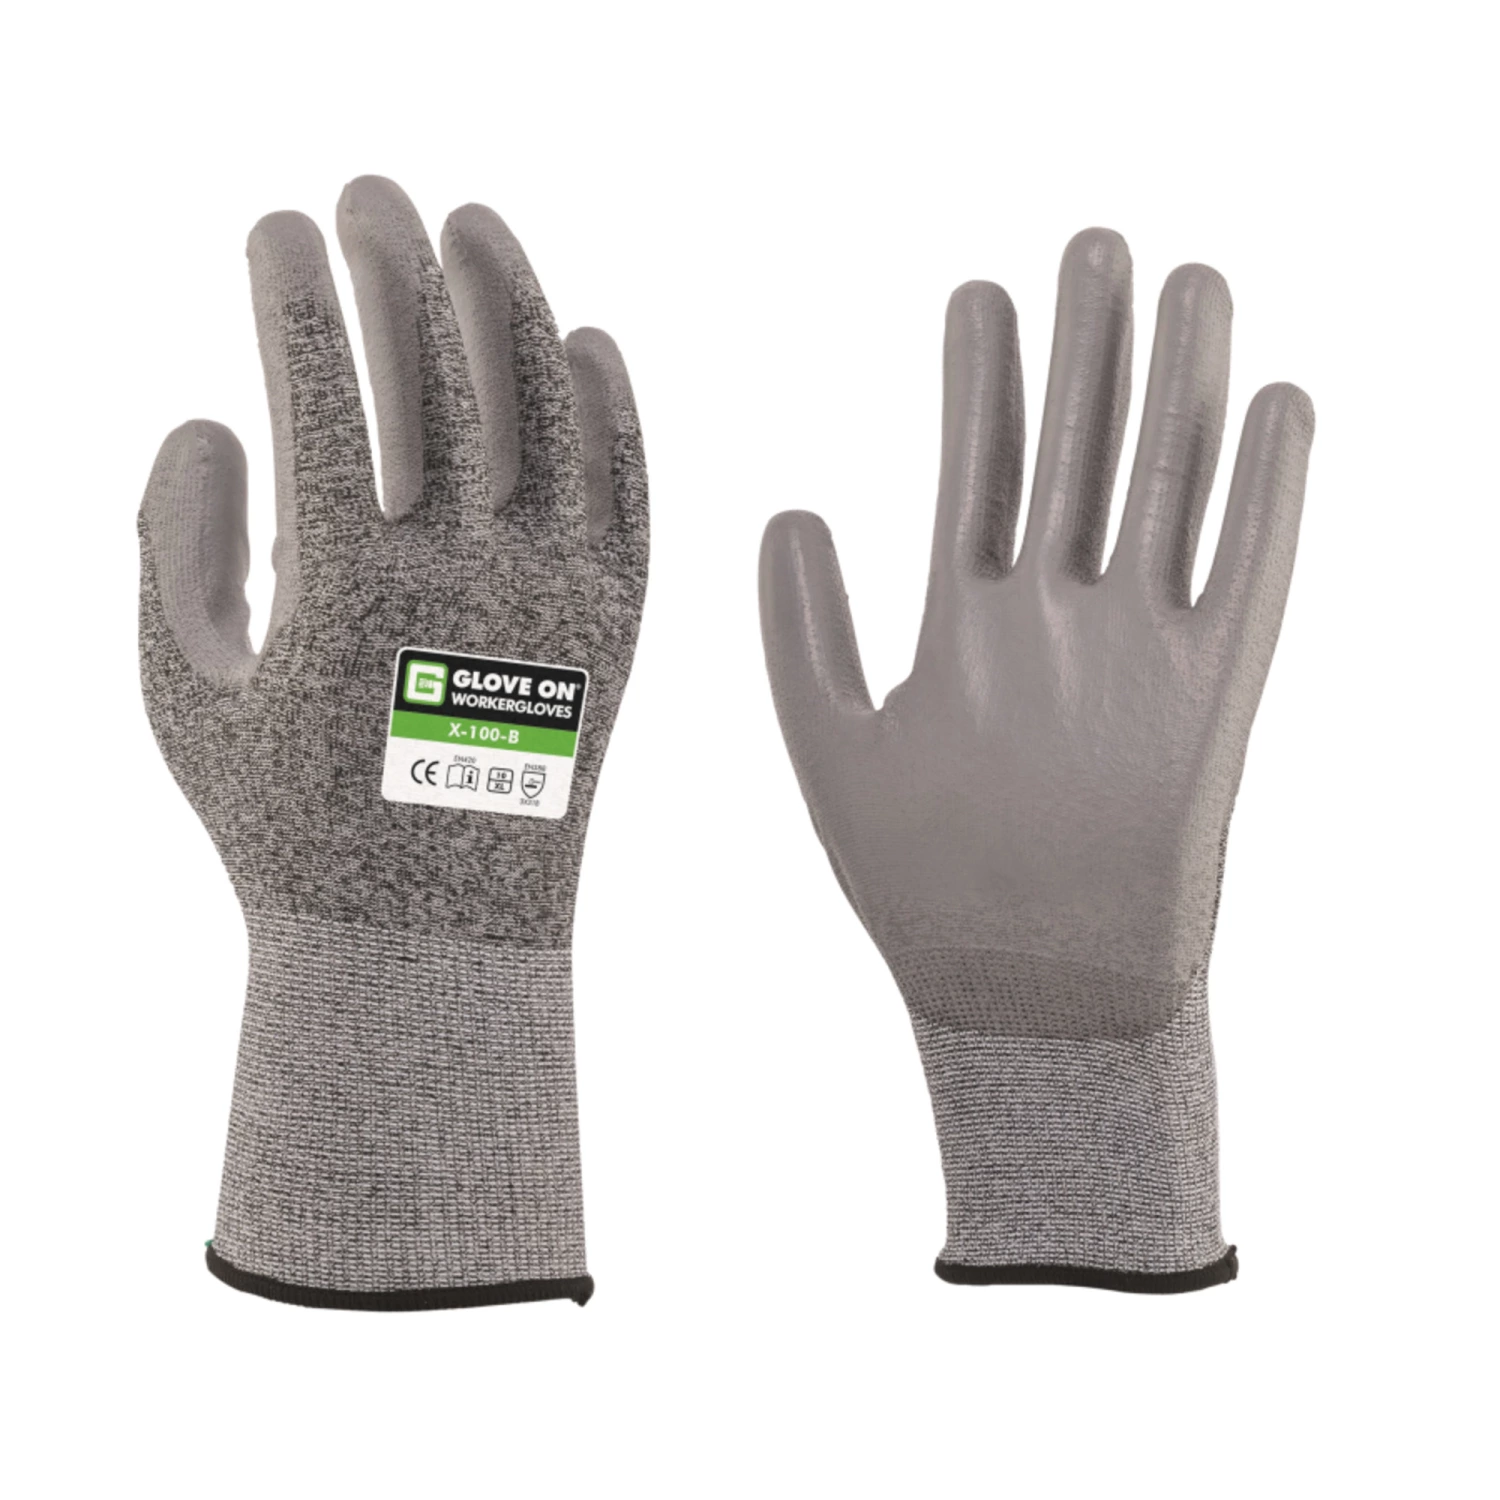 Gant de travail Glove On Protect X 100 B - taille 8-image